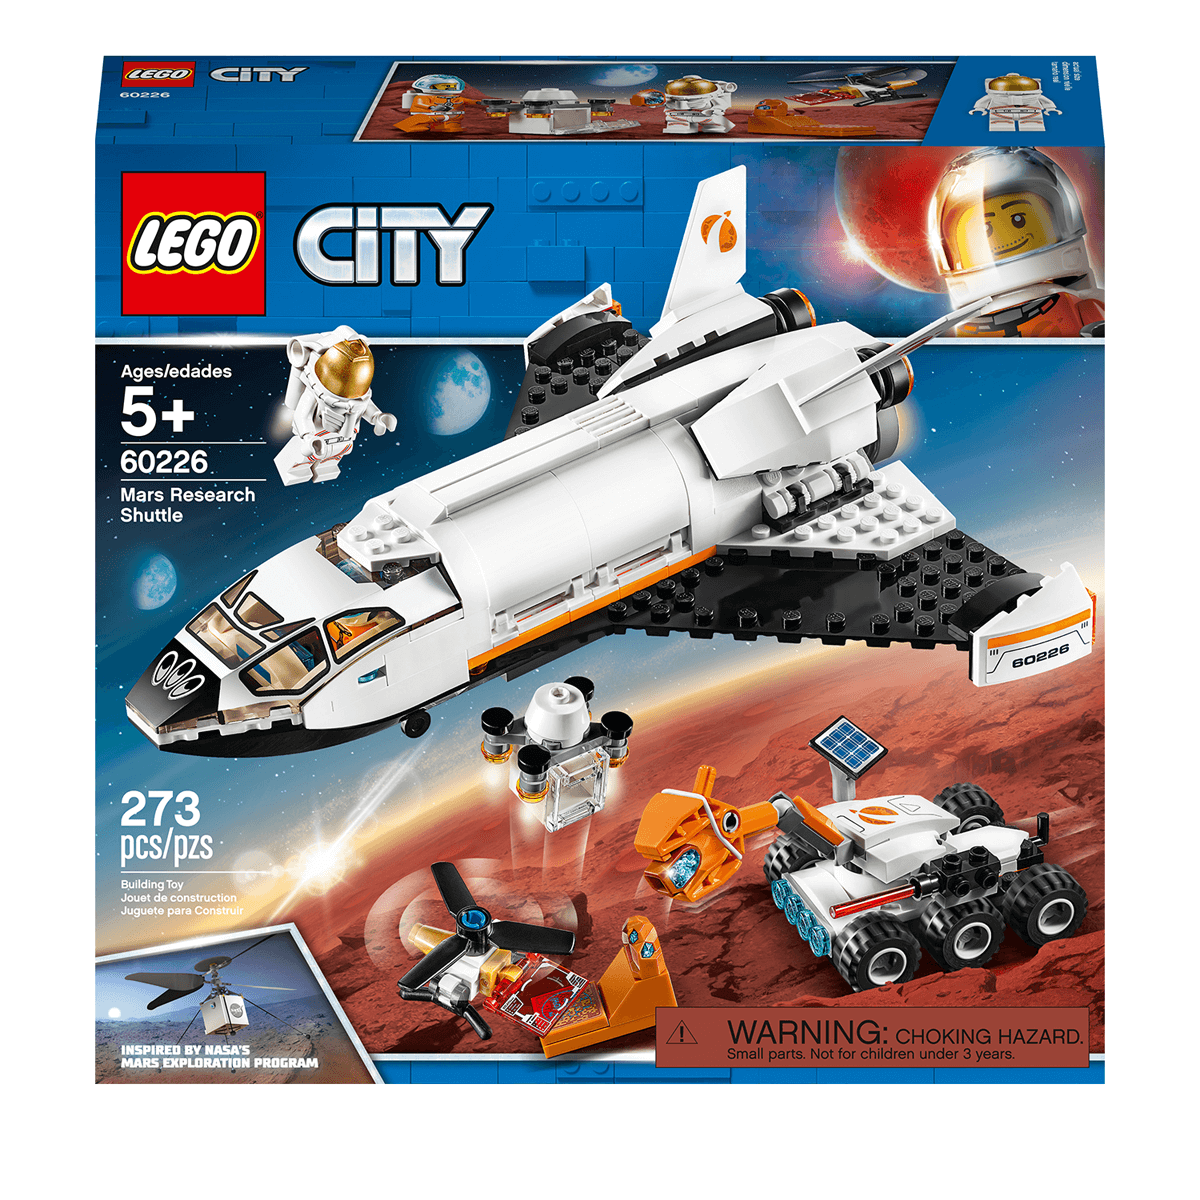  LEGO City Mars Research Shuttle Spaceship Construction - 60226